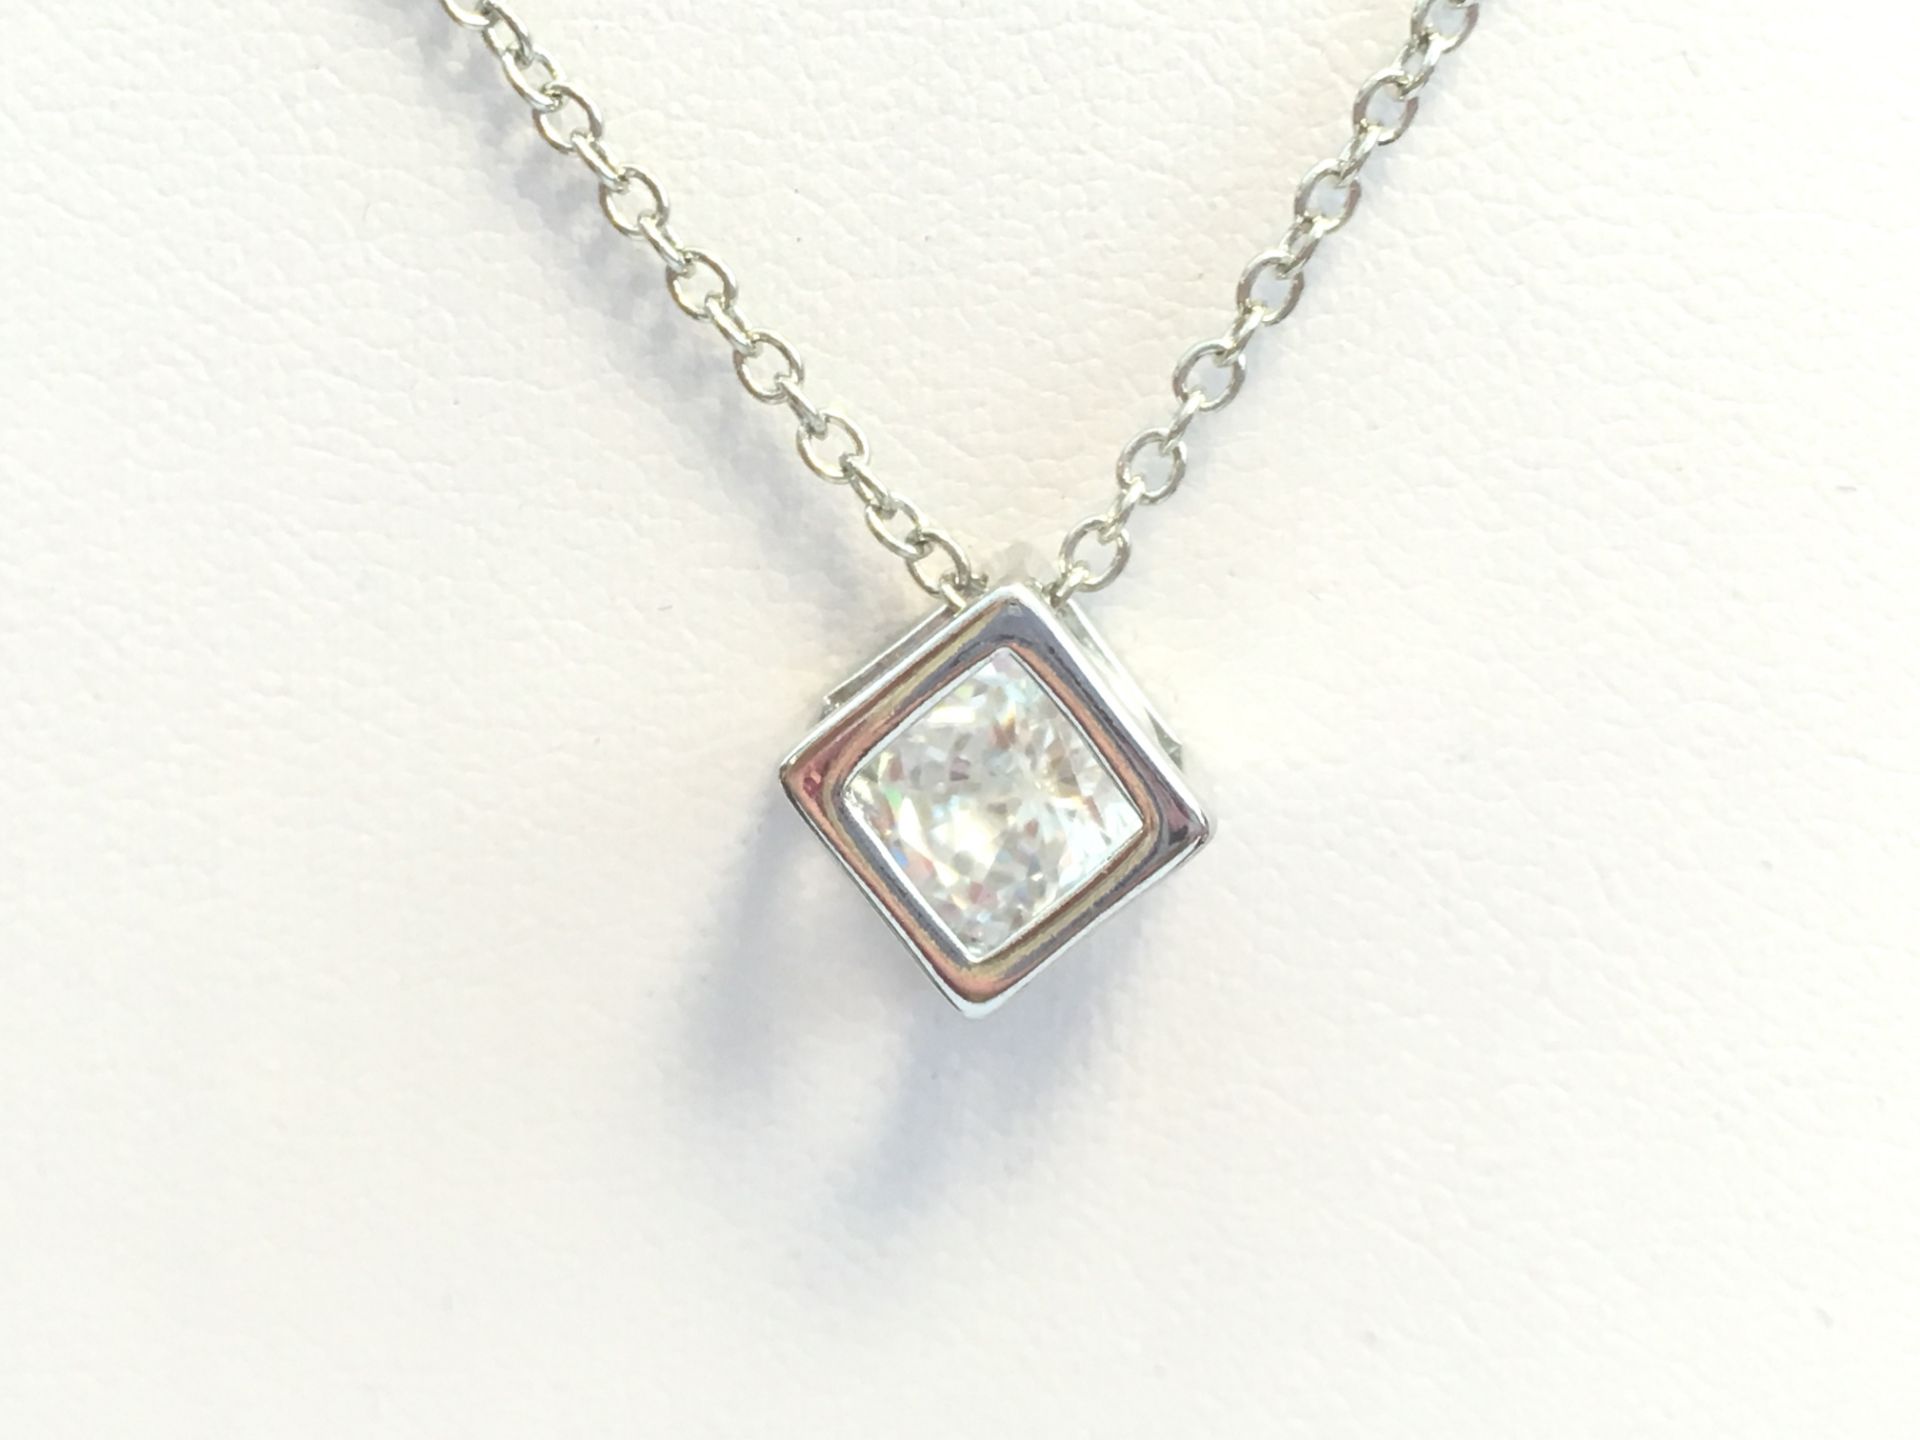 Silver Necklace and Earring set with Swarovski Crystal AND CUBE DETAIL - Image 2 of 4